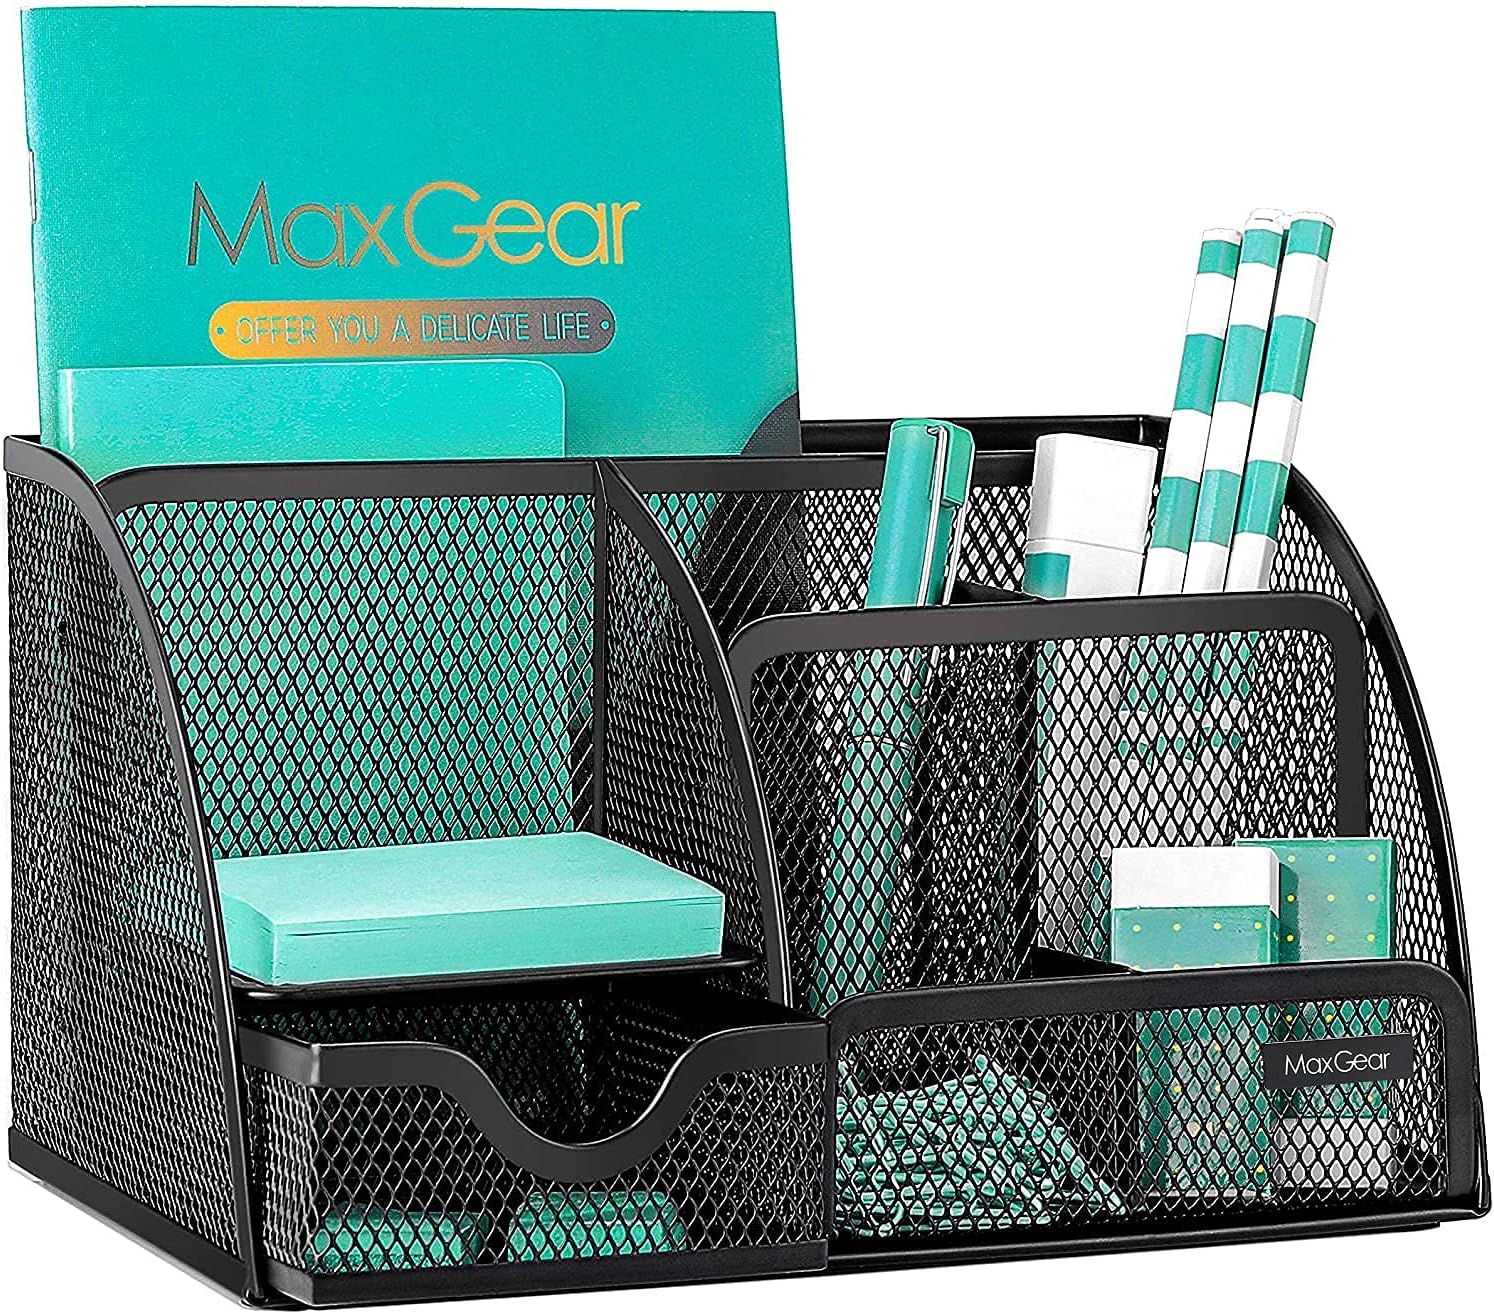 MaxGear Mesh Desk Organizer, Desktop Organizer with Drawer, Office Supplies Multi-Functional Caddy, Metal Stationary Black Desk Caddy, 6 Compartments, 8.7 x 5.5 x 5 inch, 1 Pack